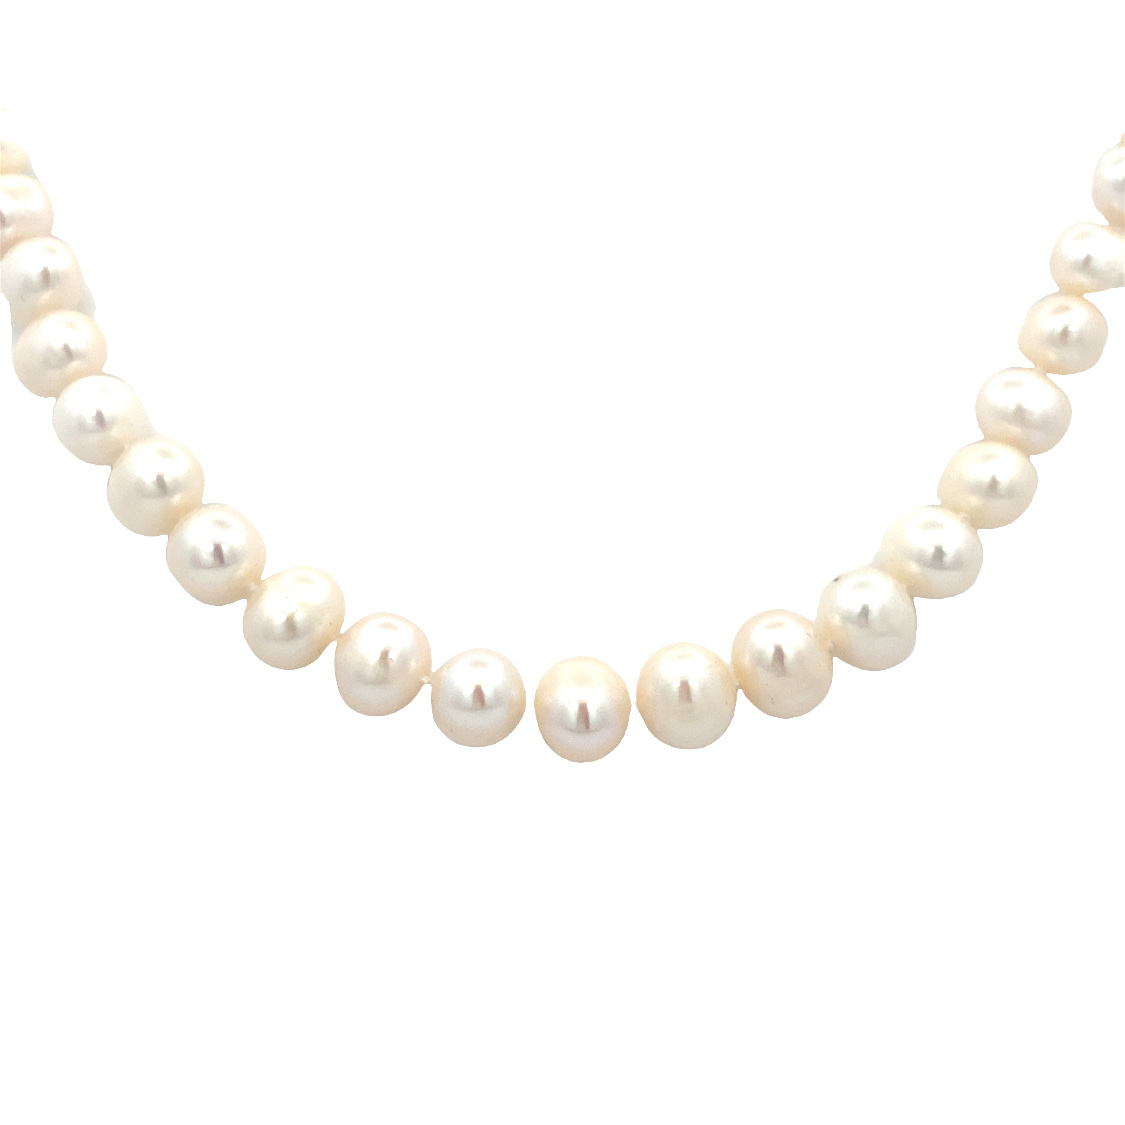 Sterling Silver Freshwater Pearl Necklace Measuring 20 Inches